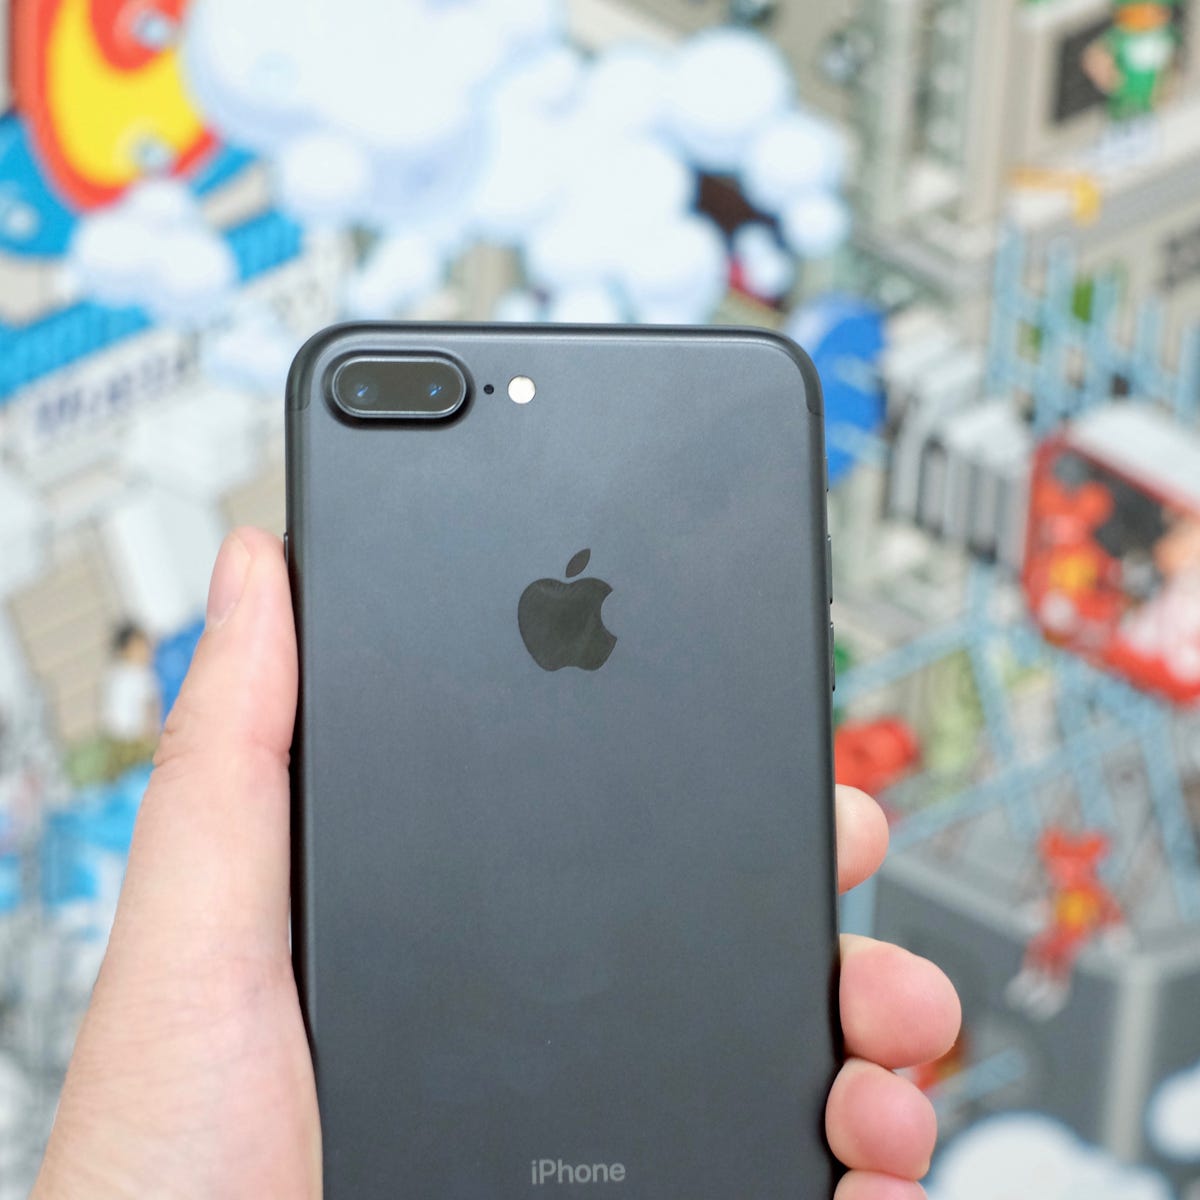 iPhone 7 Plus hands-on: A weekend full of adjustments